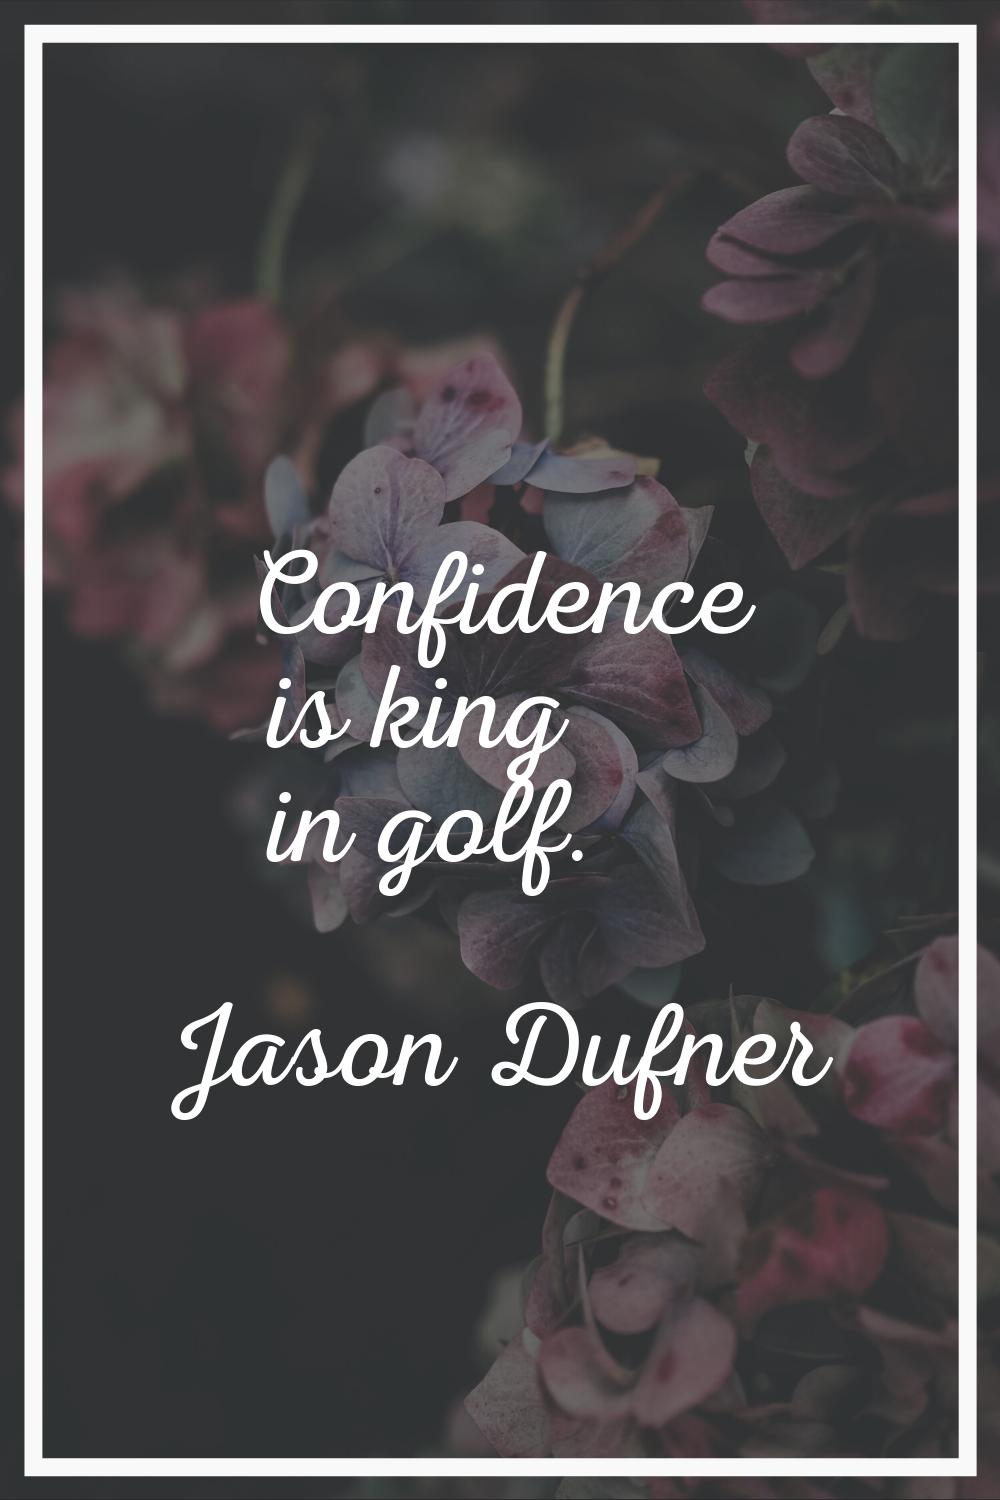 Confidence is king in golf.